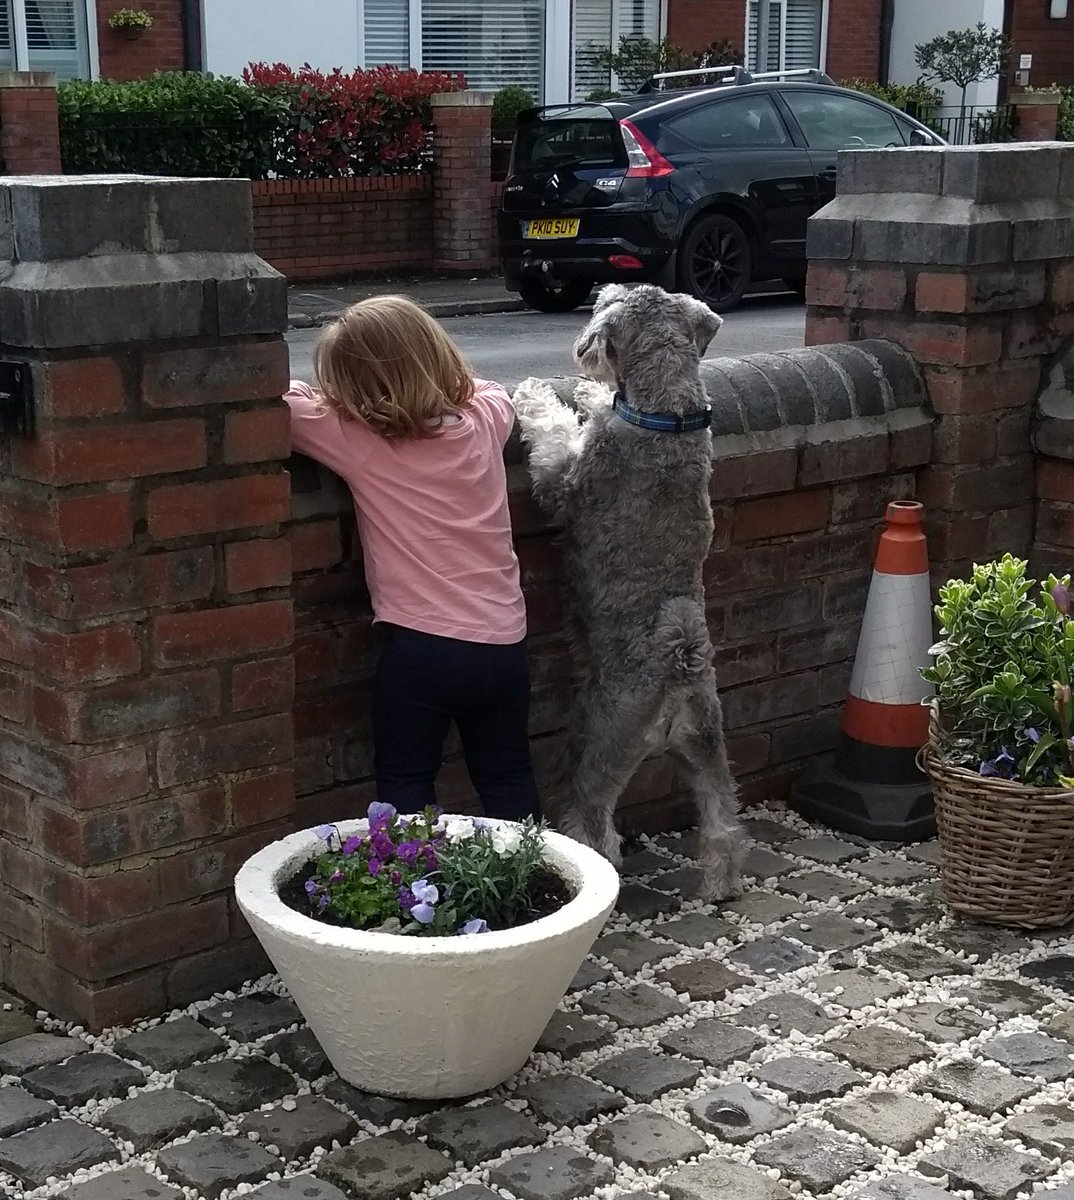 How cute is this my granddaughter and George watching a dog walking down the street lol. 
#grandaughter #minatureschnauzer
#SchnauzerGang #cute #adorable